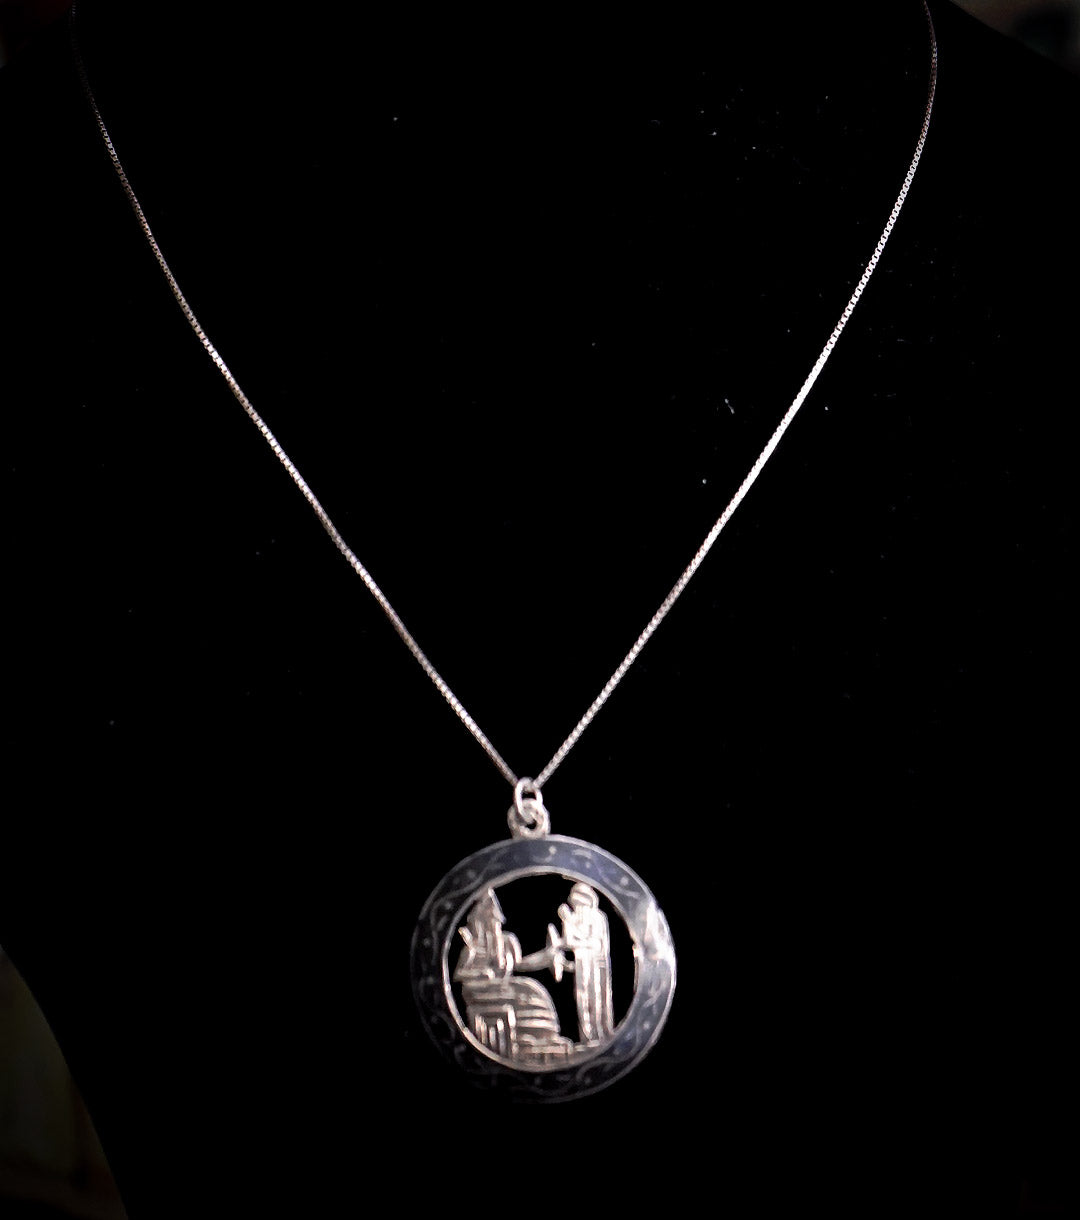 Ishtar & Gilgamesh Stamped Goddess Charm Necklace in Sterling Silver